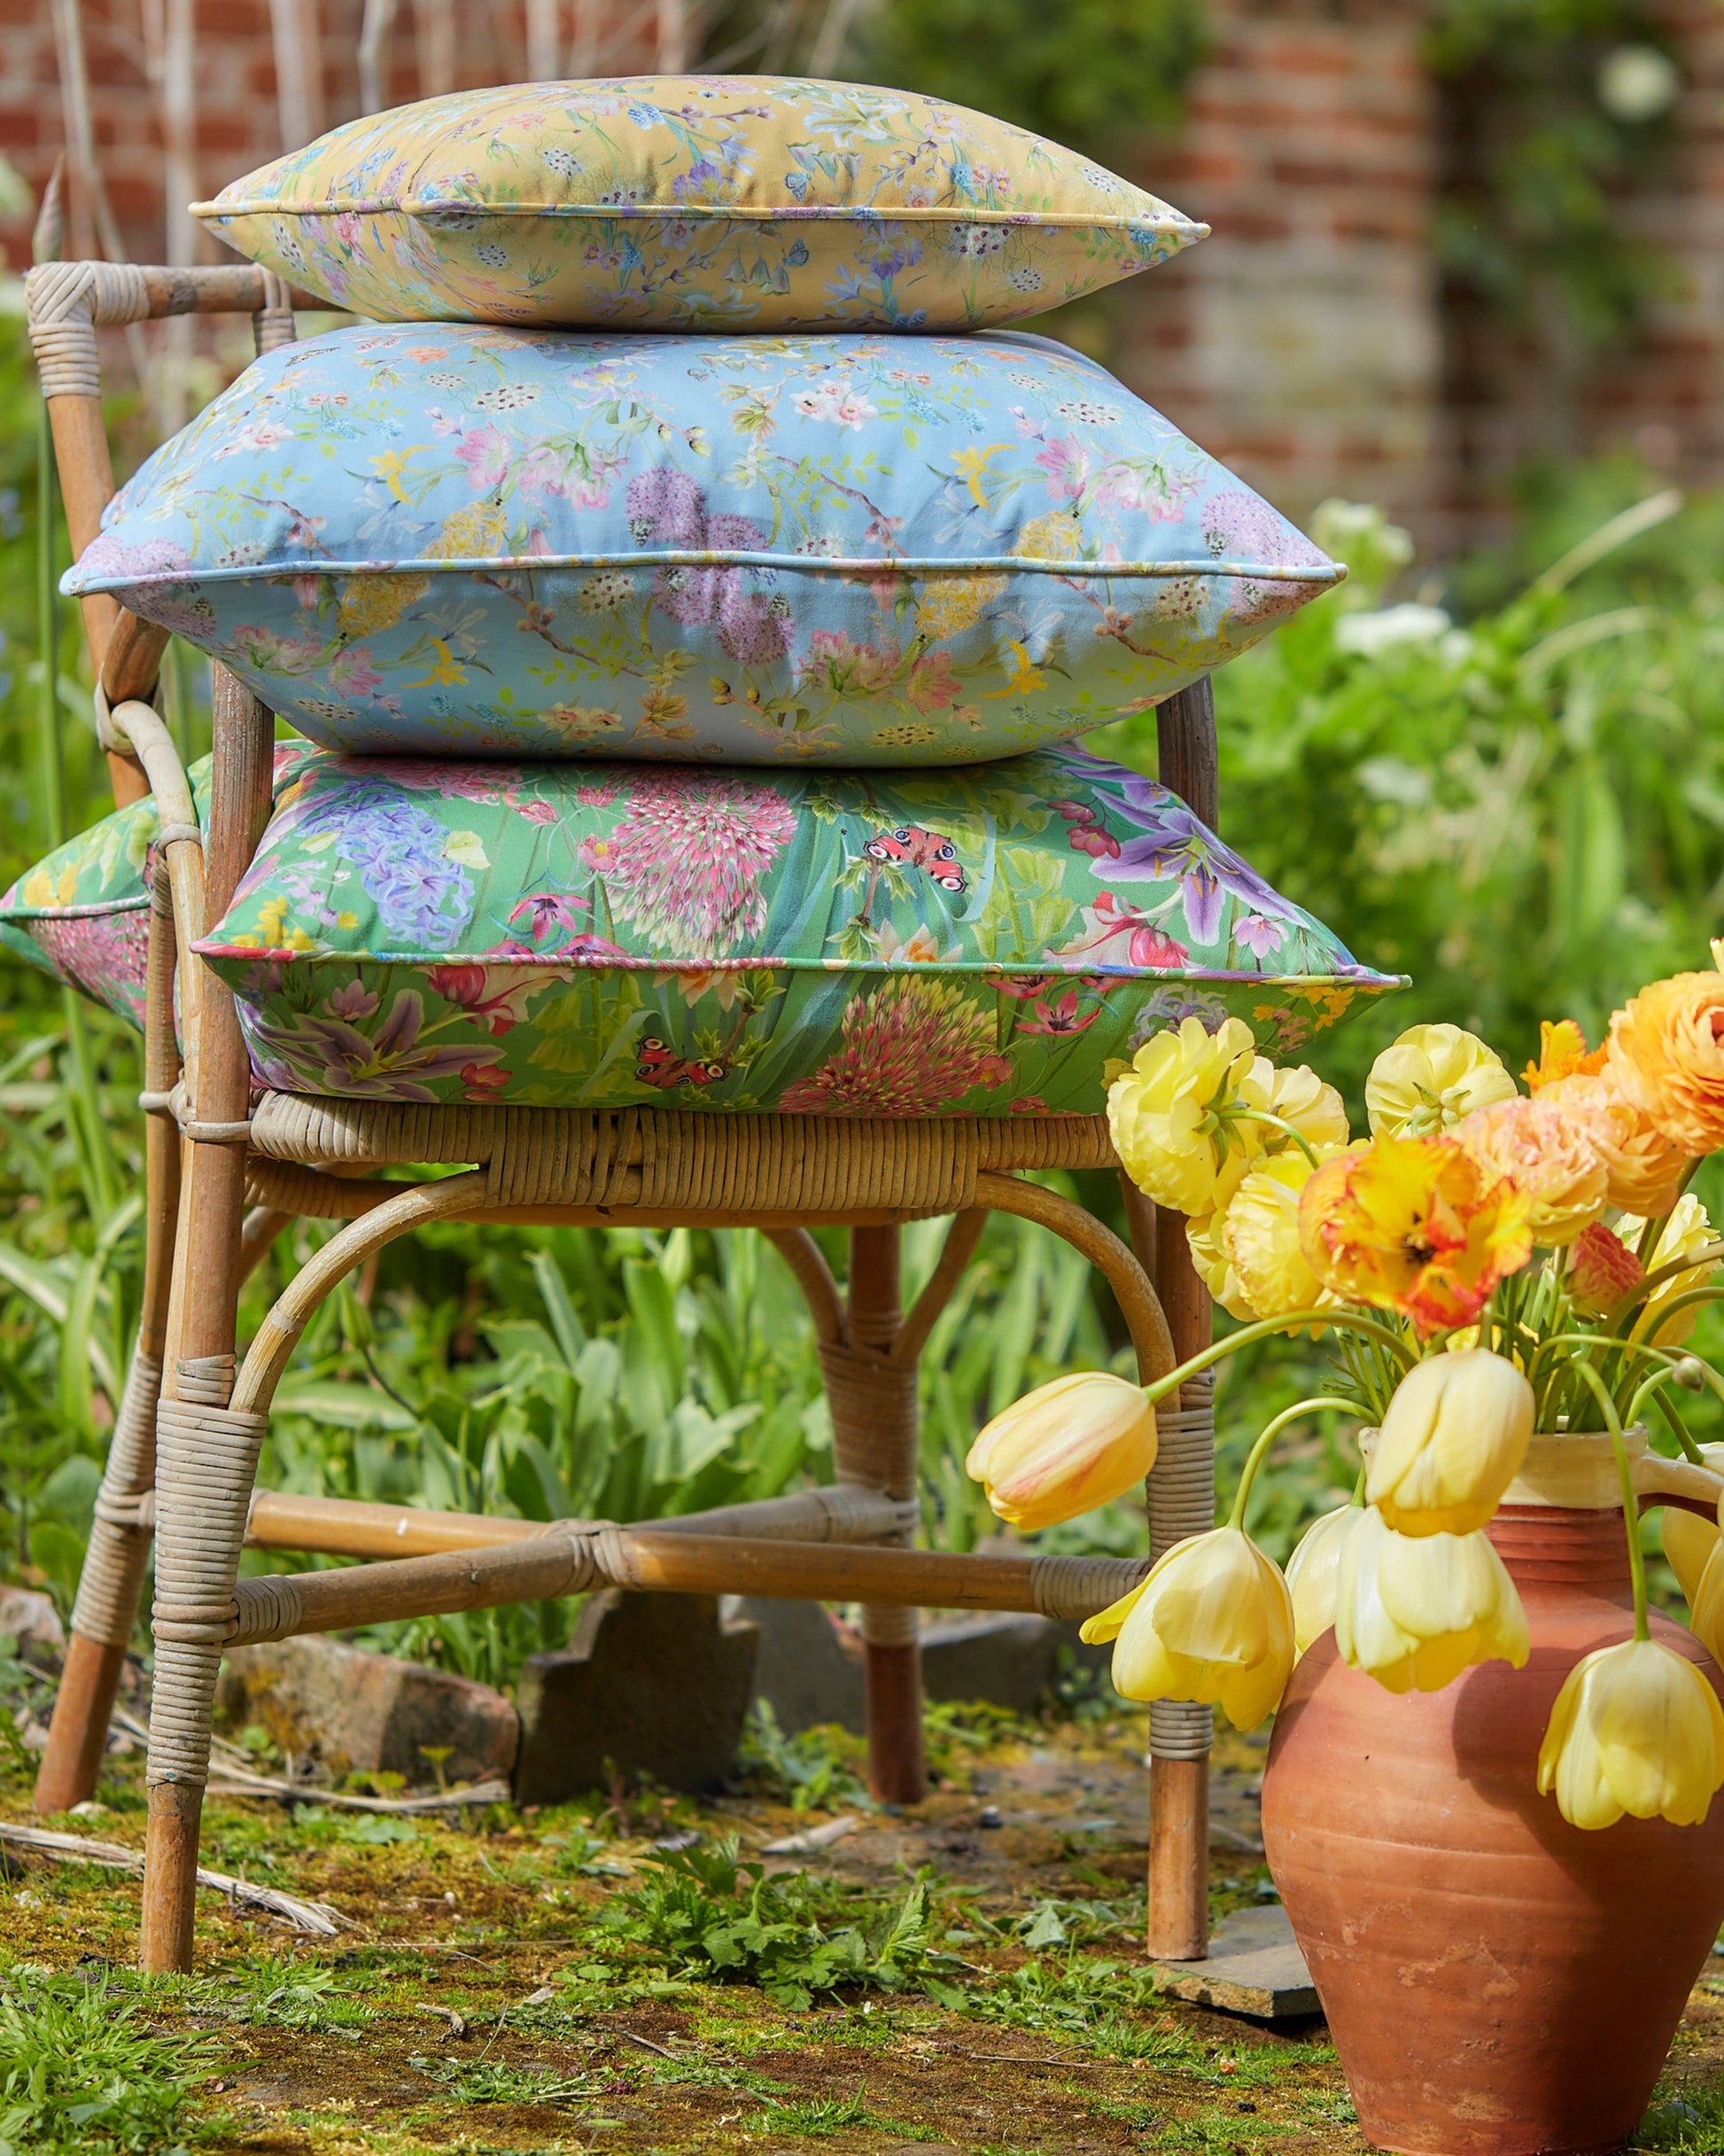 Optimistic interiors filled with yellow blue and green floral designer cushions in sustainable vegan fabrics